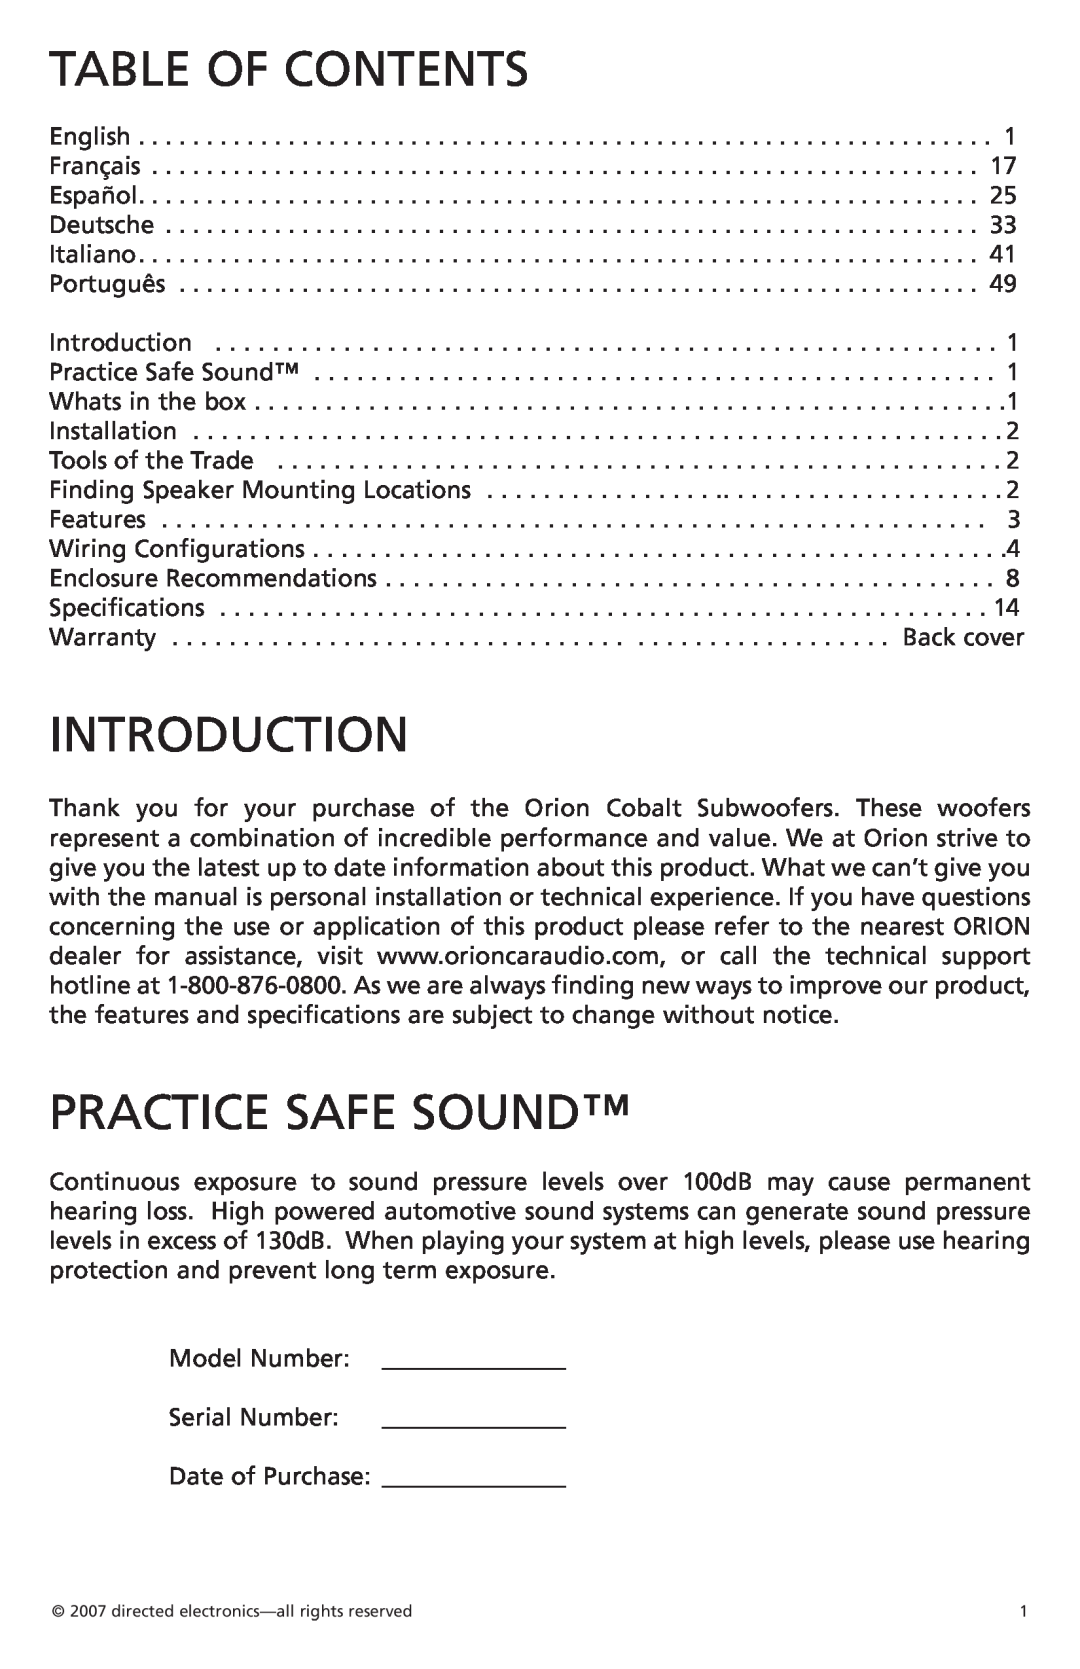 Orion Car Audio CO124S, CO154S, CO104S owner manual Table Of Contents, Introduction, Practice Safe Sound 